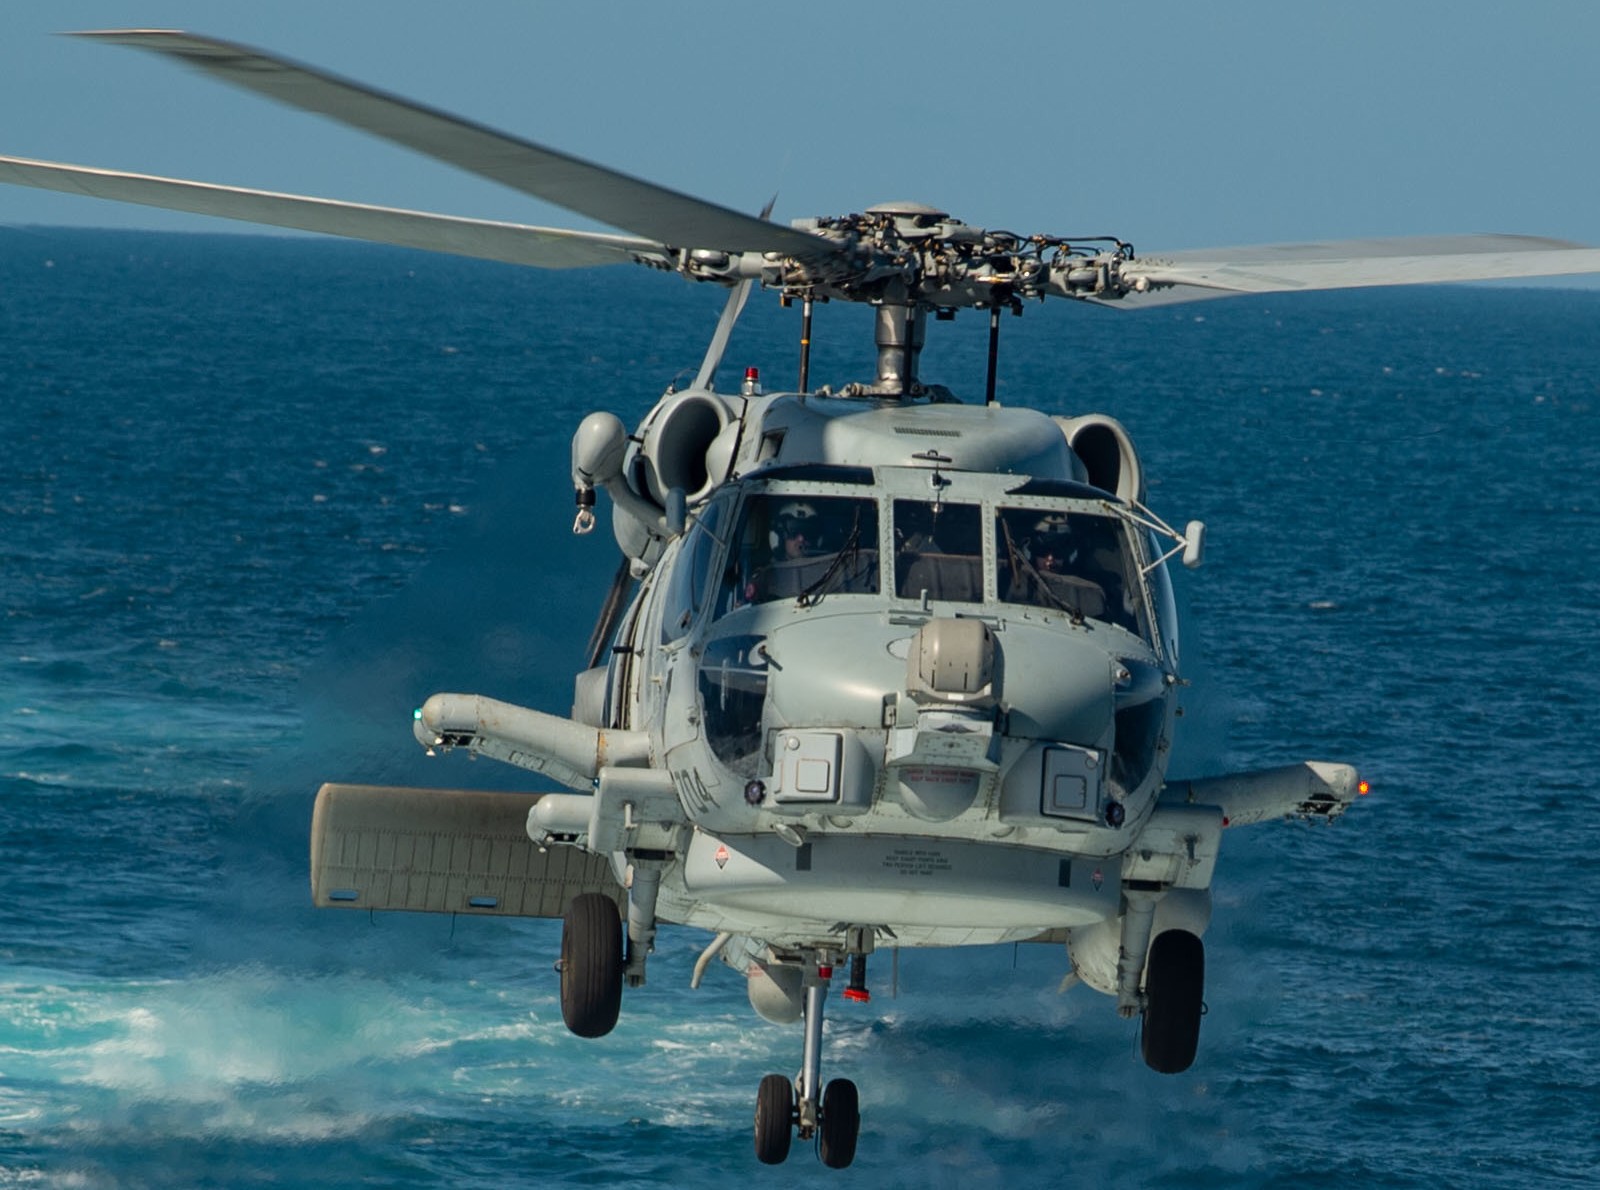 hsm-72 proud warriors helicopter maritime strike squadron mh-60r seahawk carrier air wing cvw-1 ddg-99 uss farragut 42